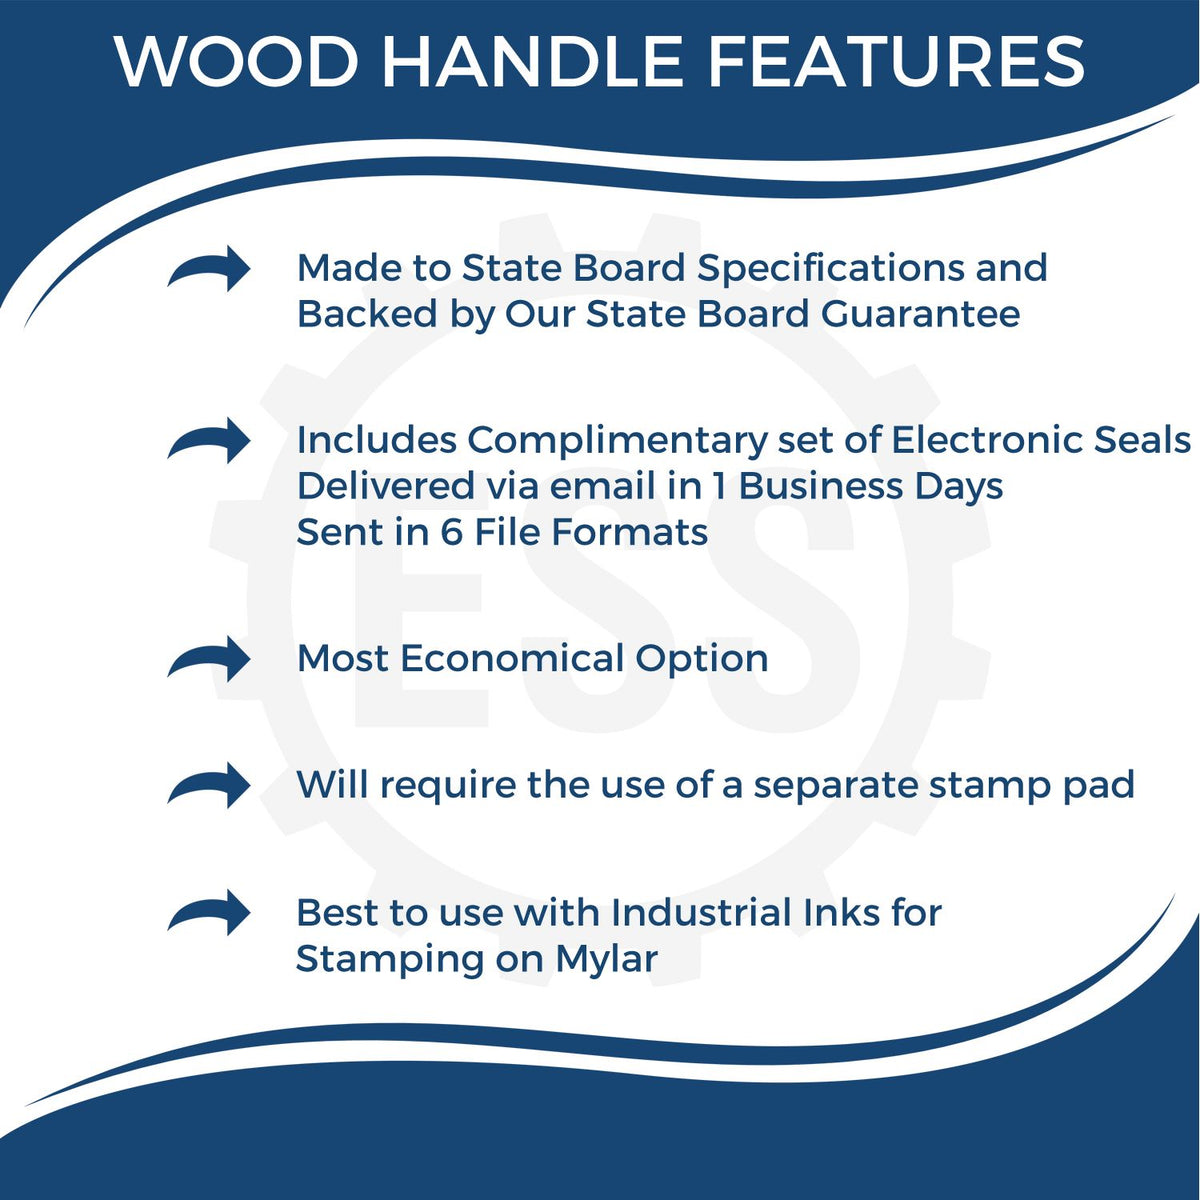 A picture of an infographic highlighting the selling points for the Wooden Handle Arkansas Rectangular Notary Public Stamp